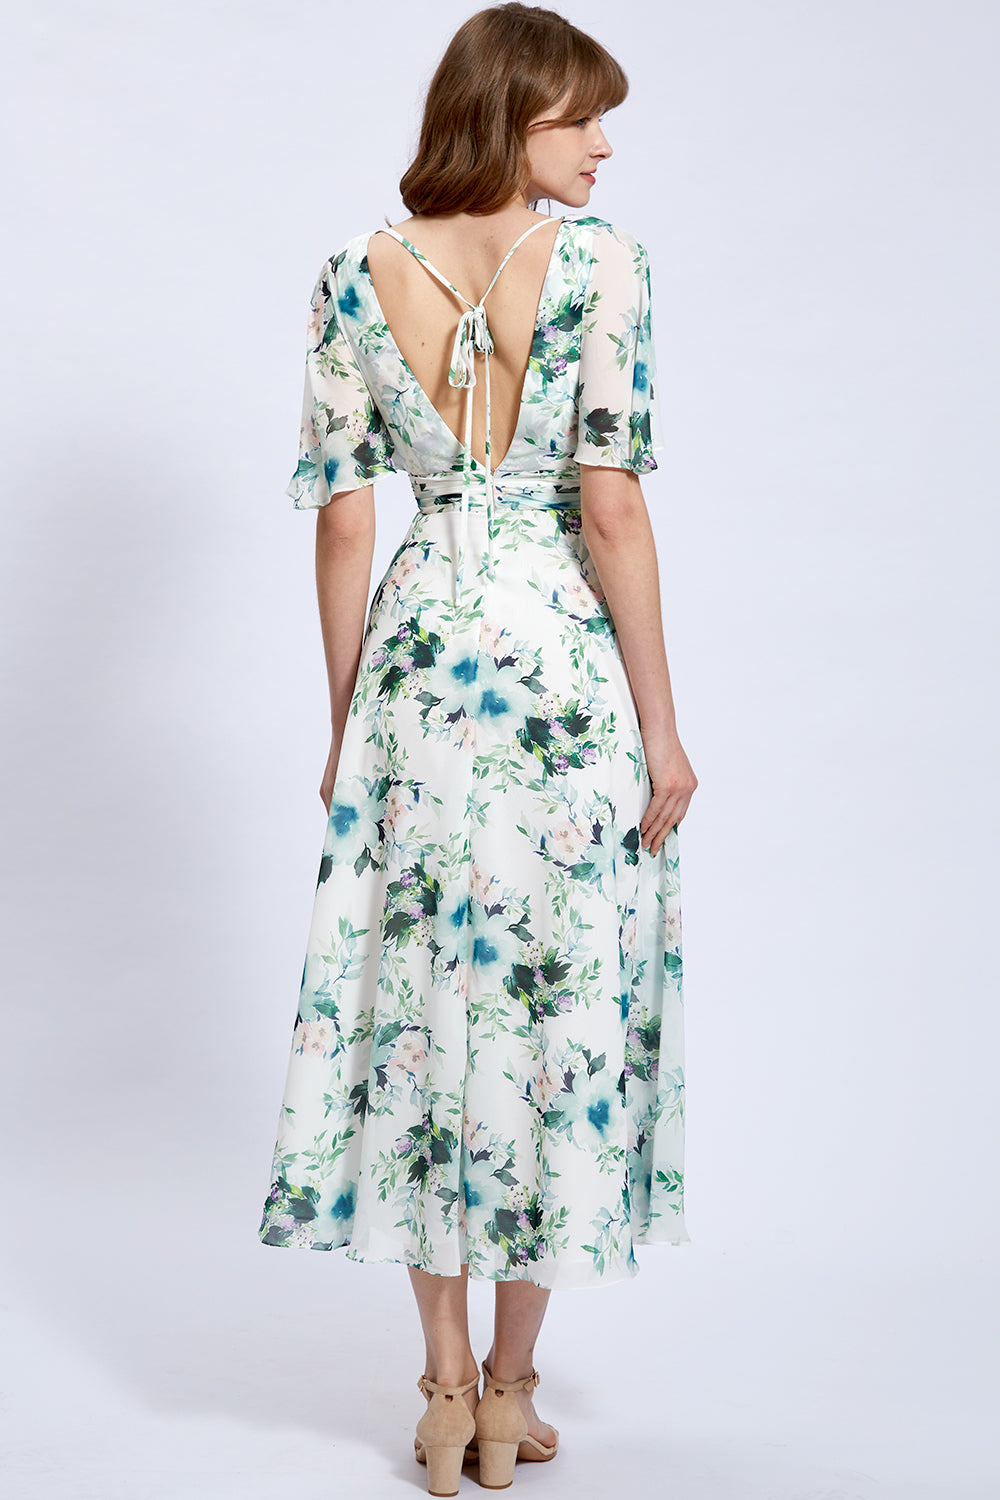 Cape Sleeves V Neck Floral Chiffon Mother of the Bride Dress